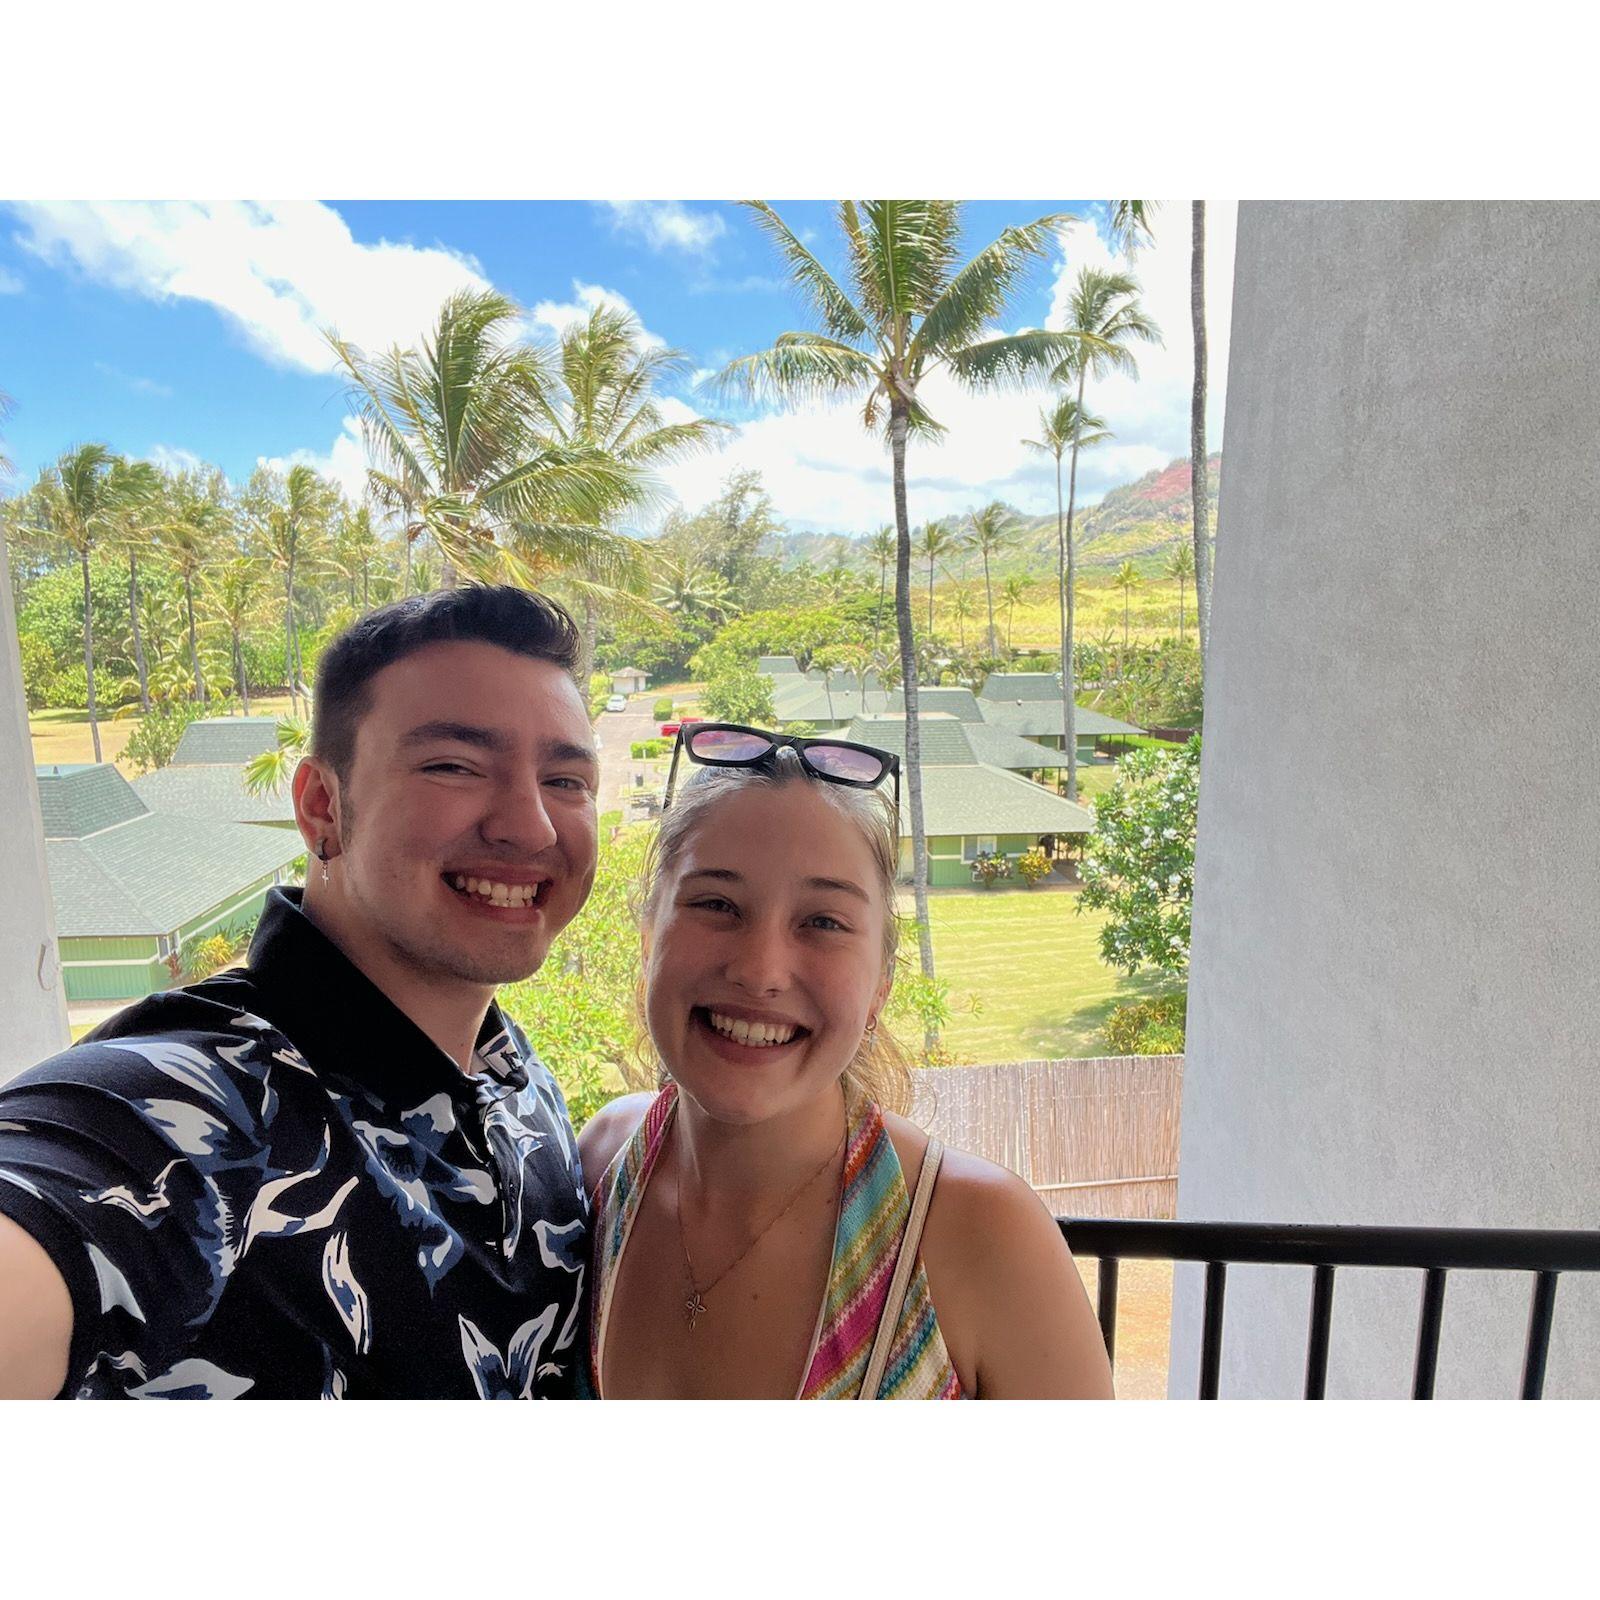 Our second day in Kauai while Jonah was still figuring out how to propose.